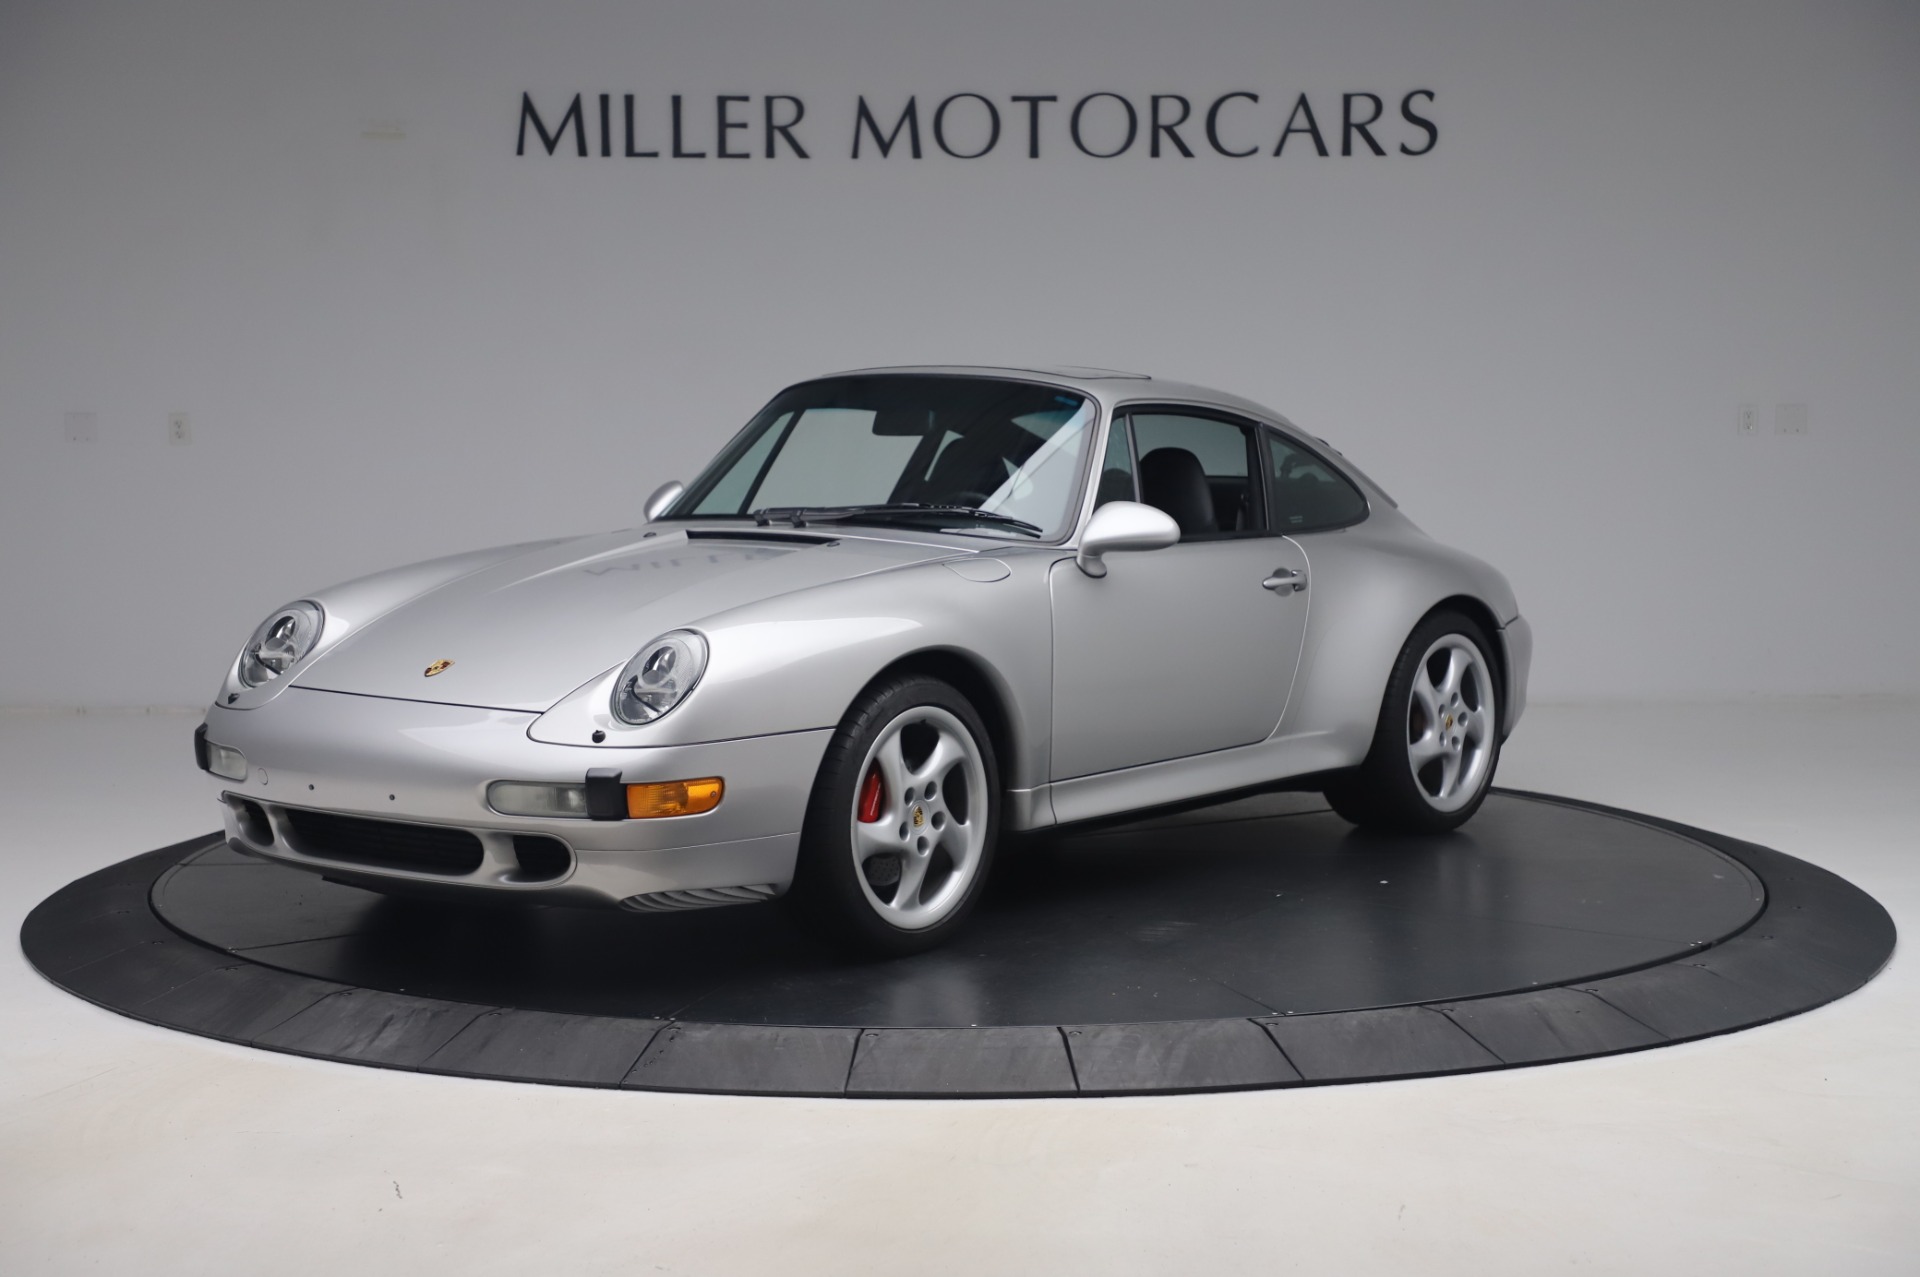 Used 1998 Porsche 911 Carrera 4S for sale Sold at Aston Martin of Greenwich in Greenwich CT 06830 1